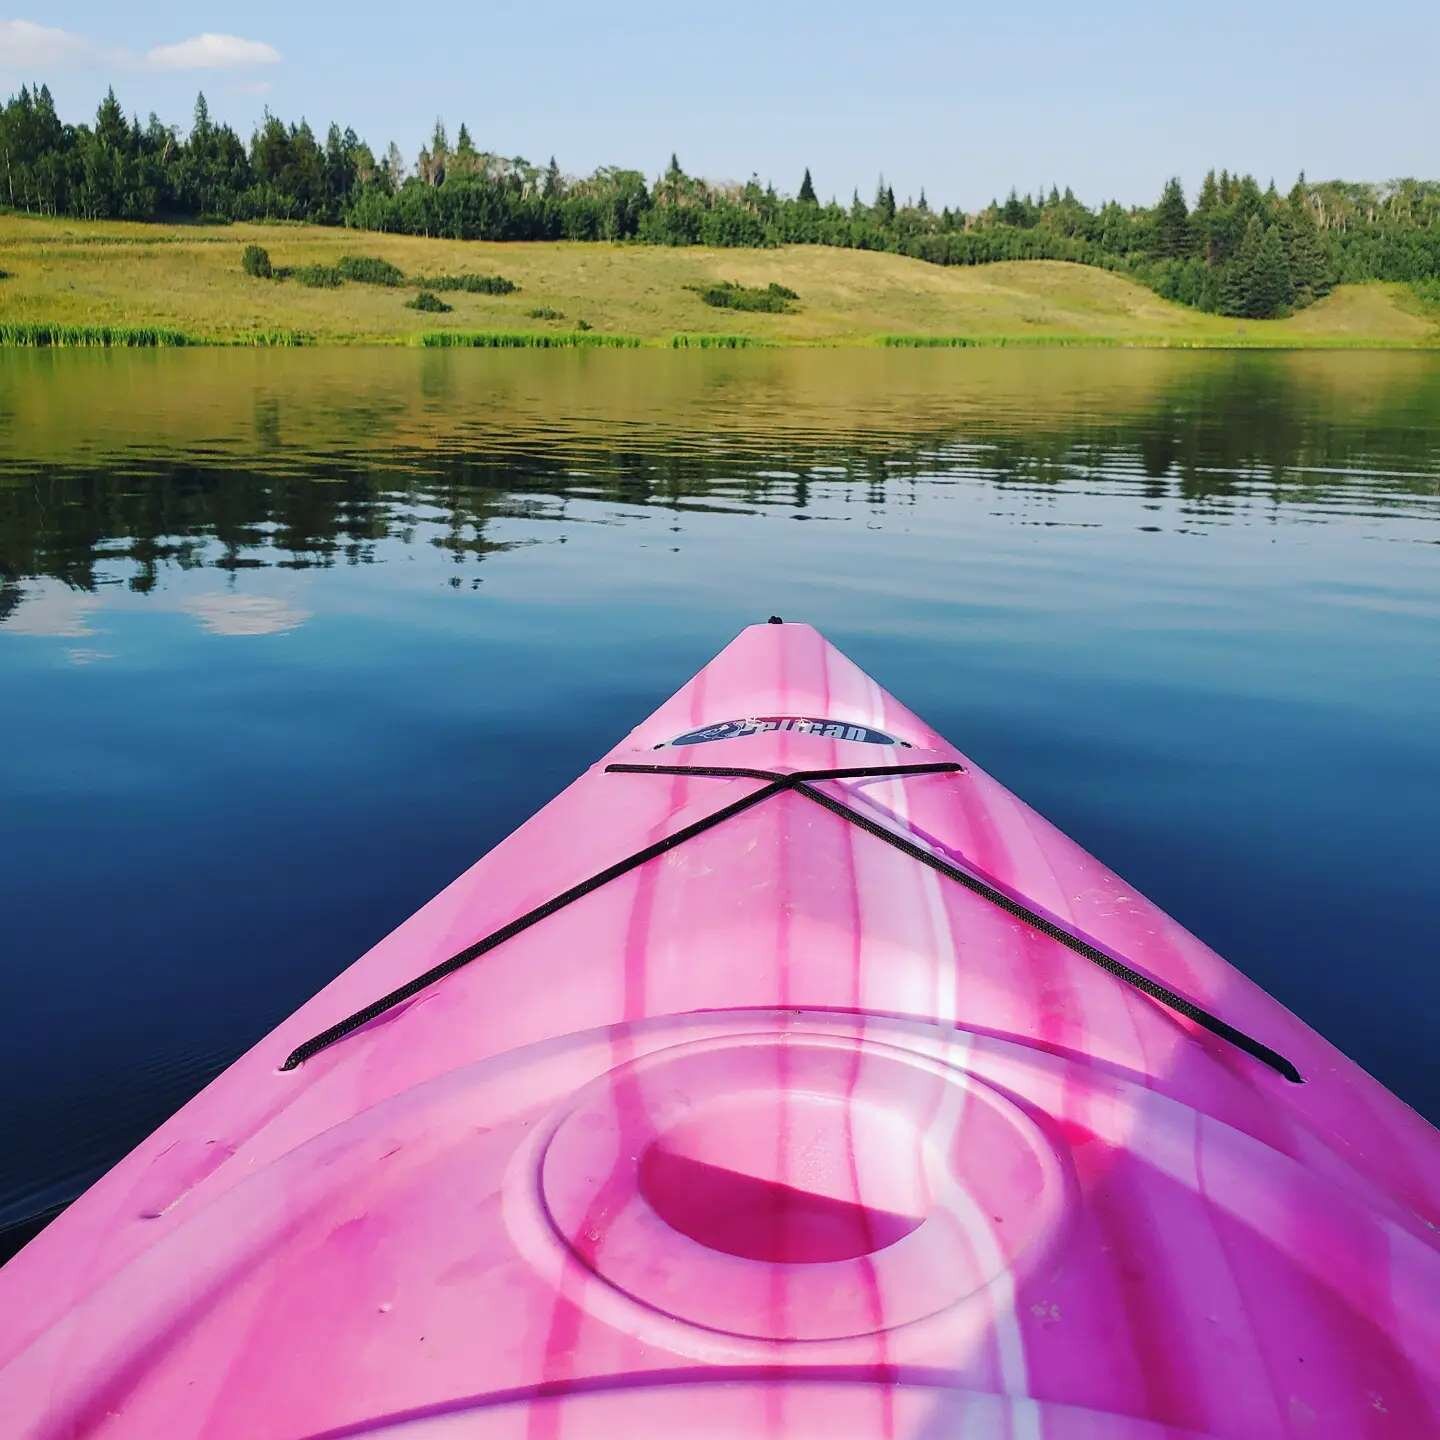 Spruce Coulee is one of our favorite places to kayak. Beautiful and calm!

#KayakMedicineHat #GetOutside #GetOffTheCouch #MyMHSummer#MedicineHat you